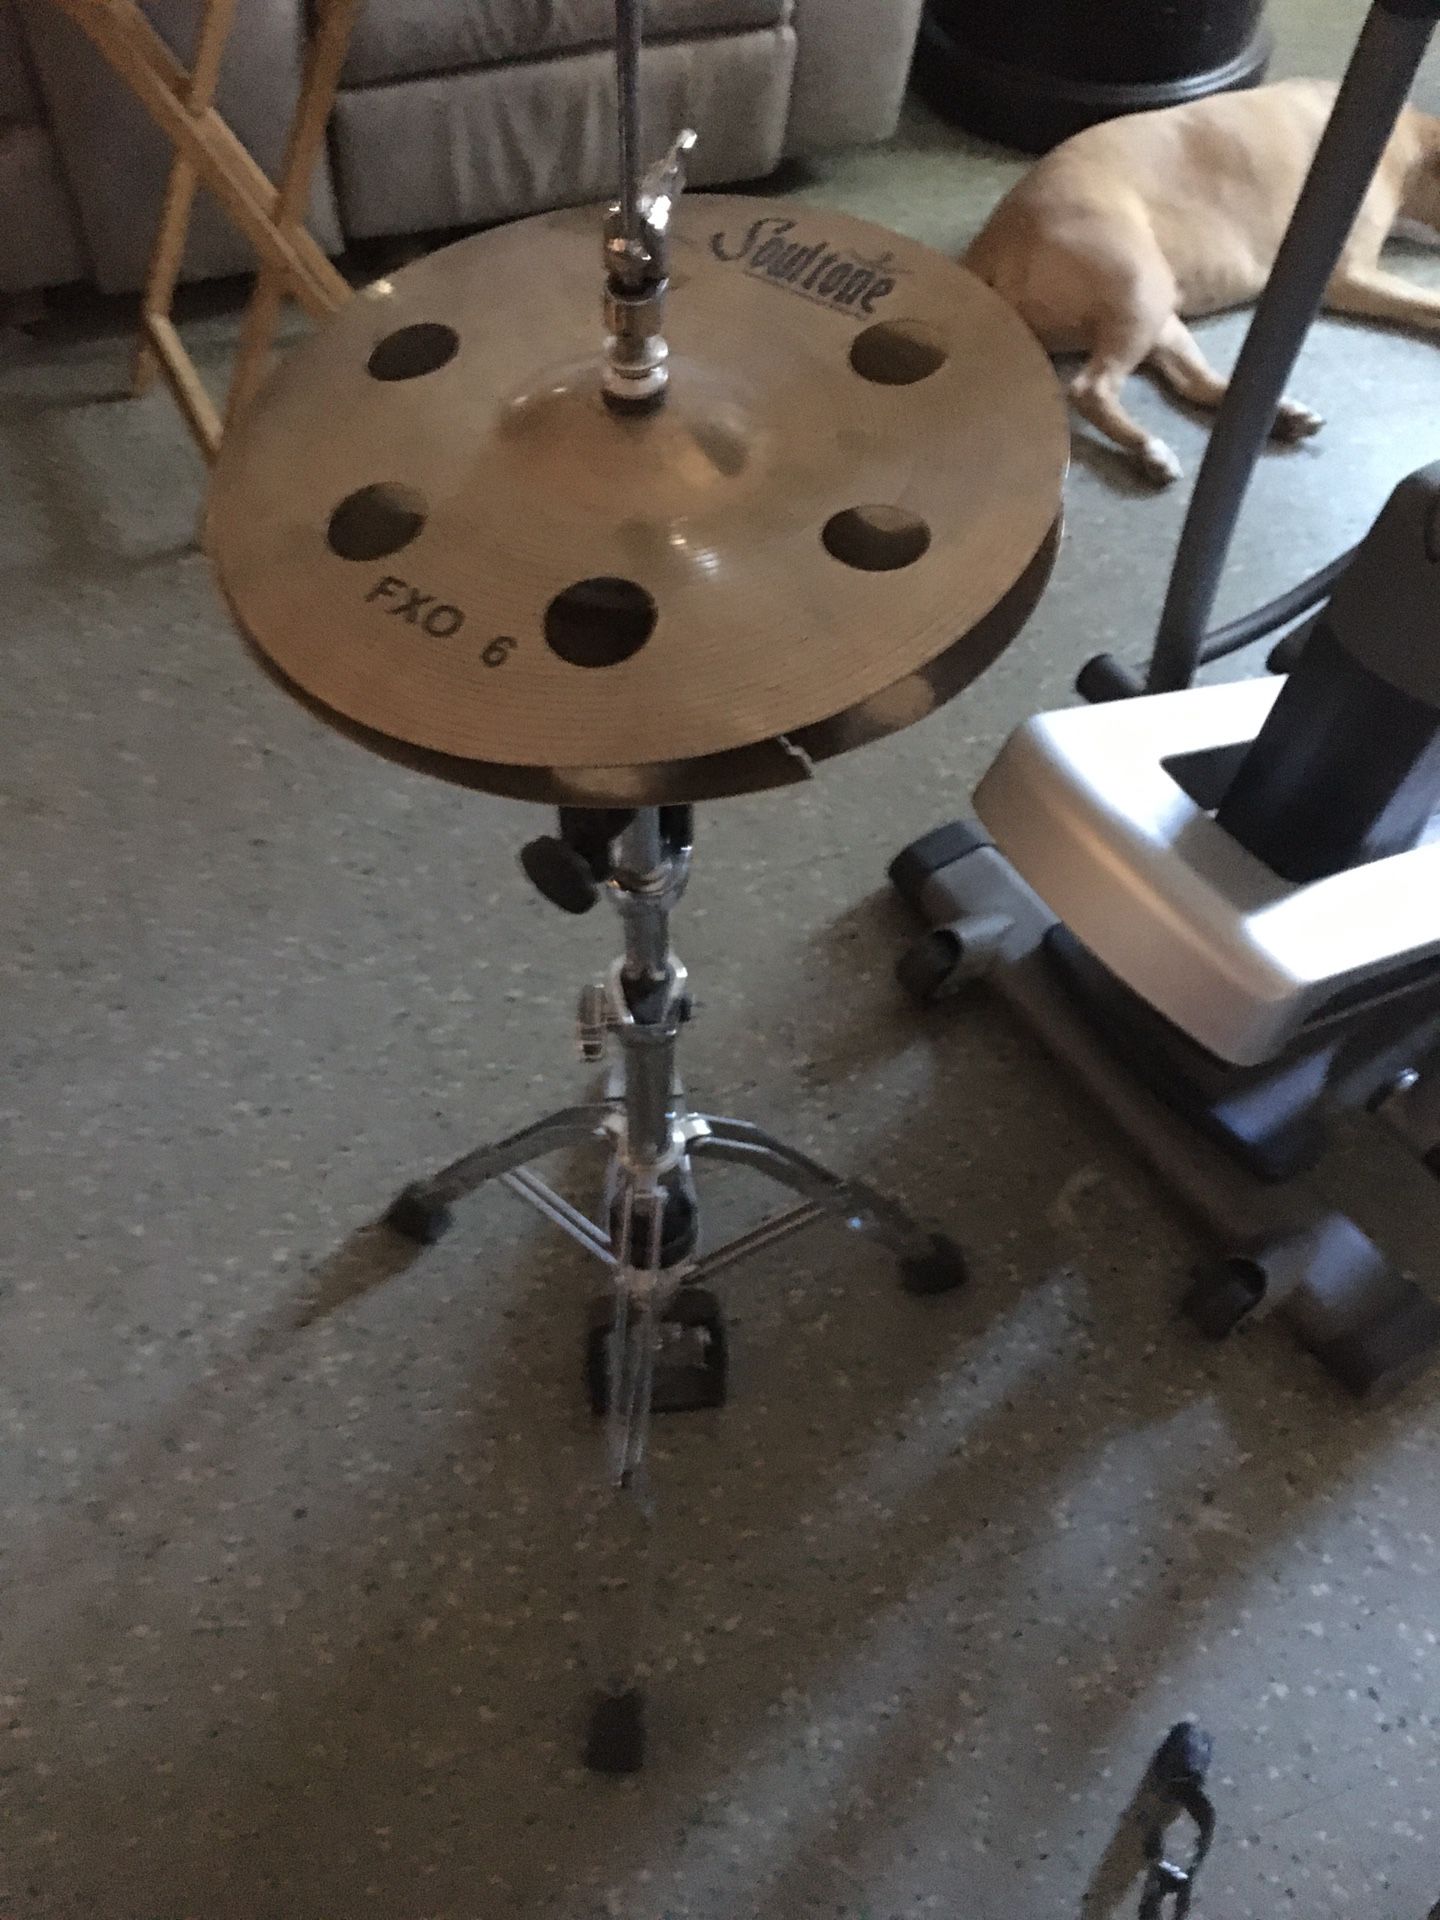 Soultone cymbals with stand